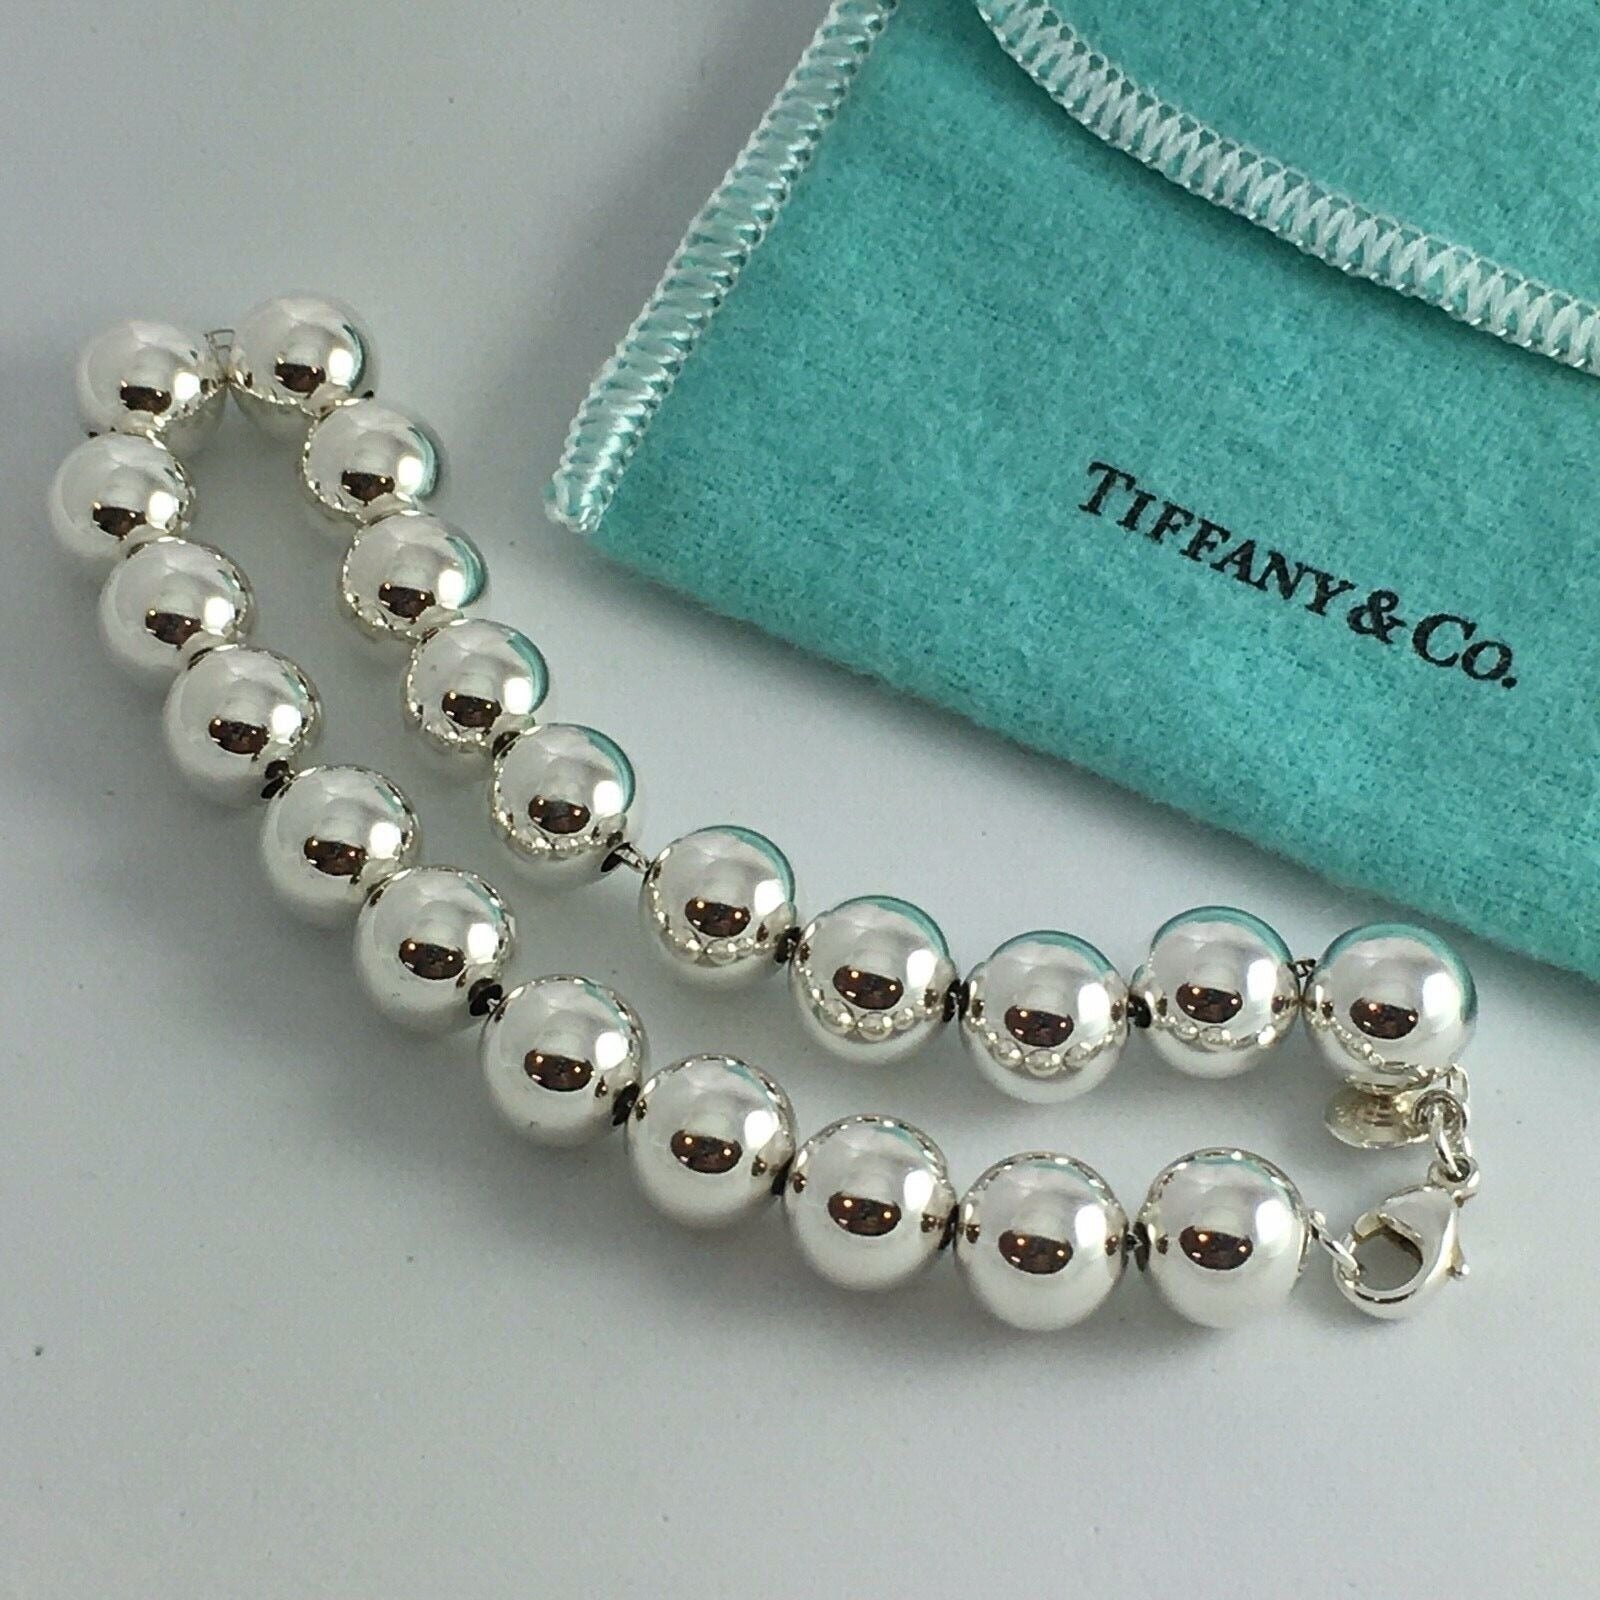 Tiffany & Co Bead Bracelet. Ideal Luxury Gift. Sterling Silver. 10 Mm Ball  Beads. FREE SHIPPING. - Etsy